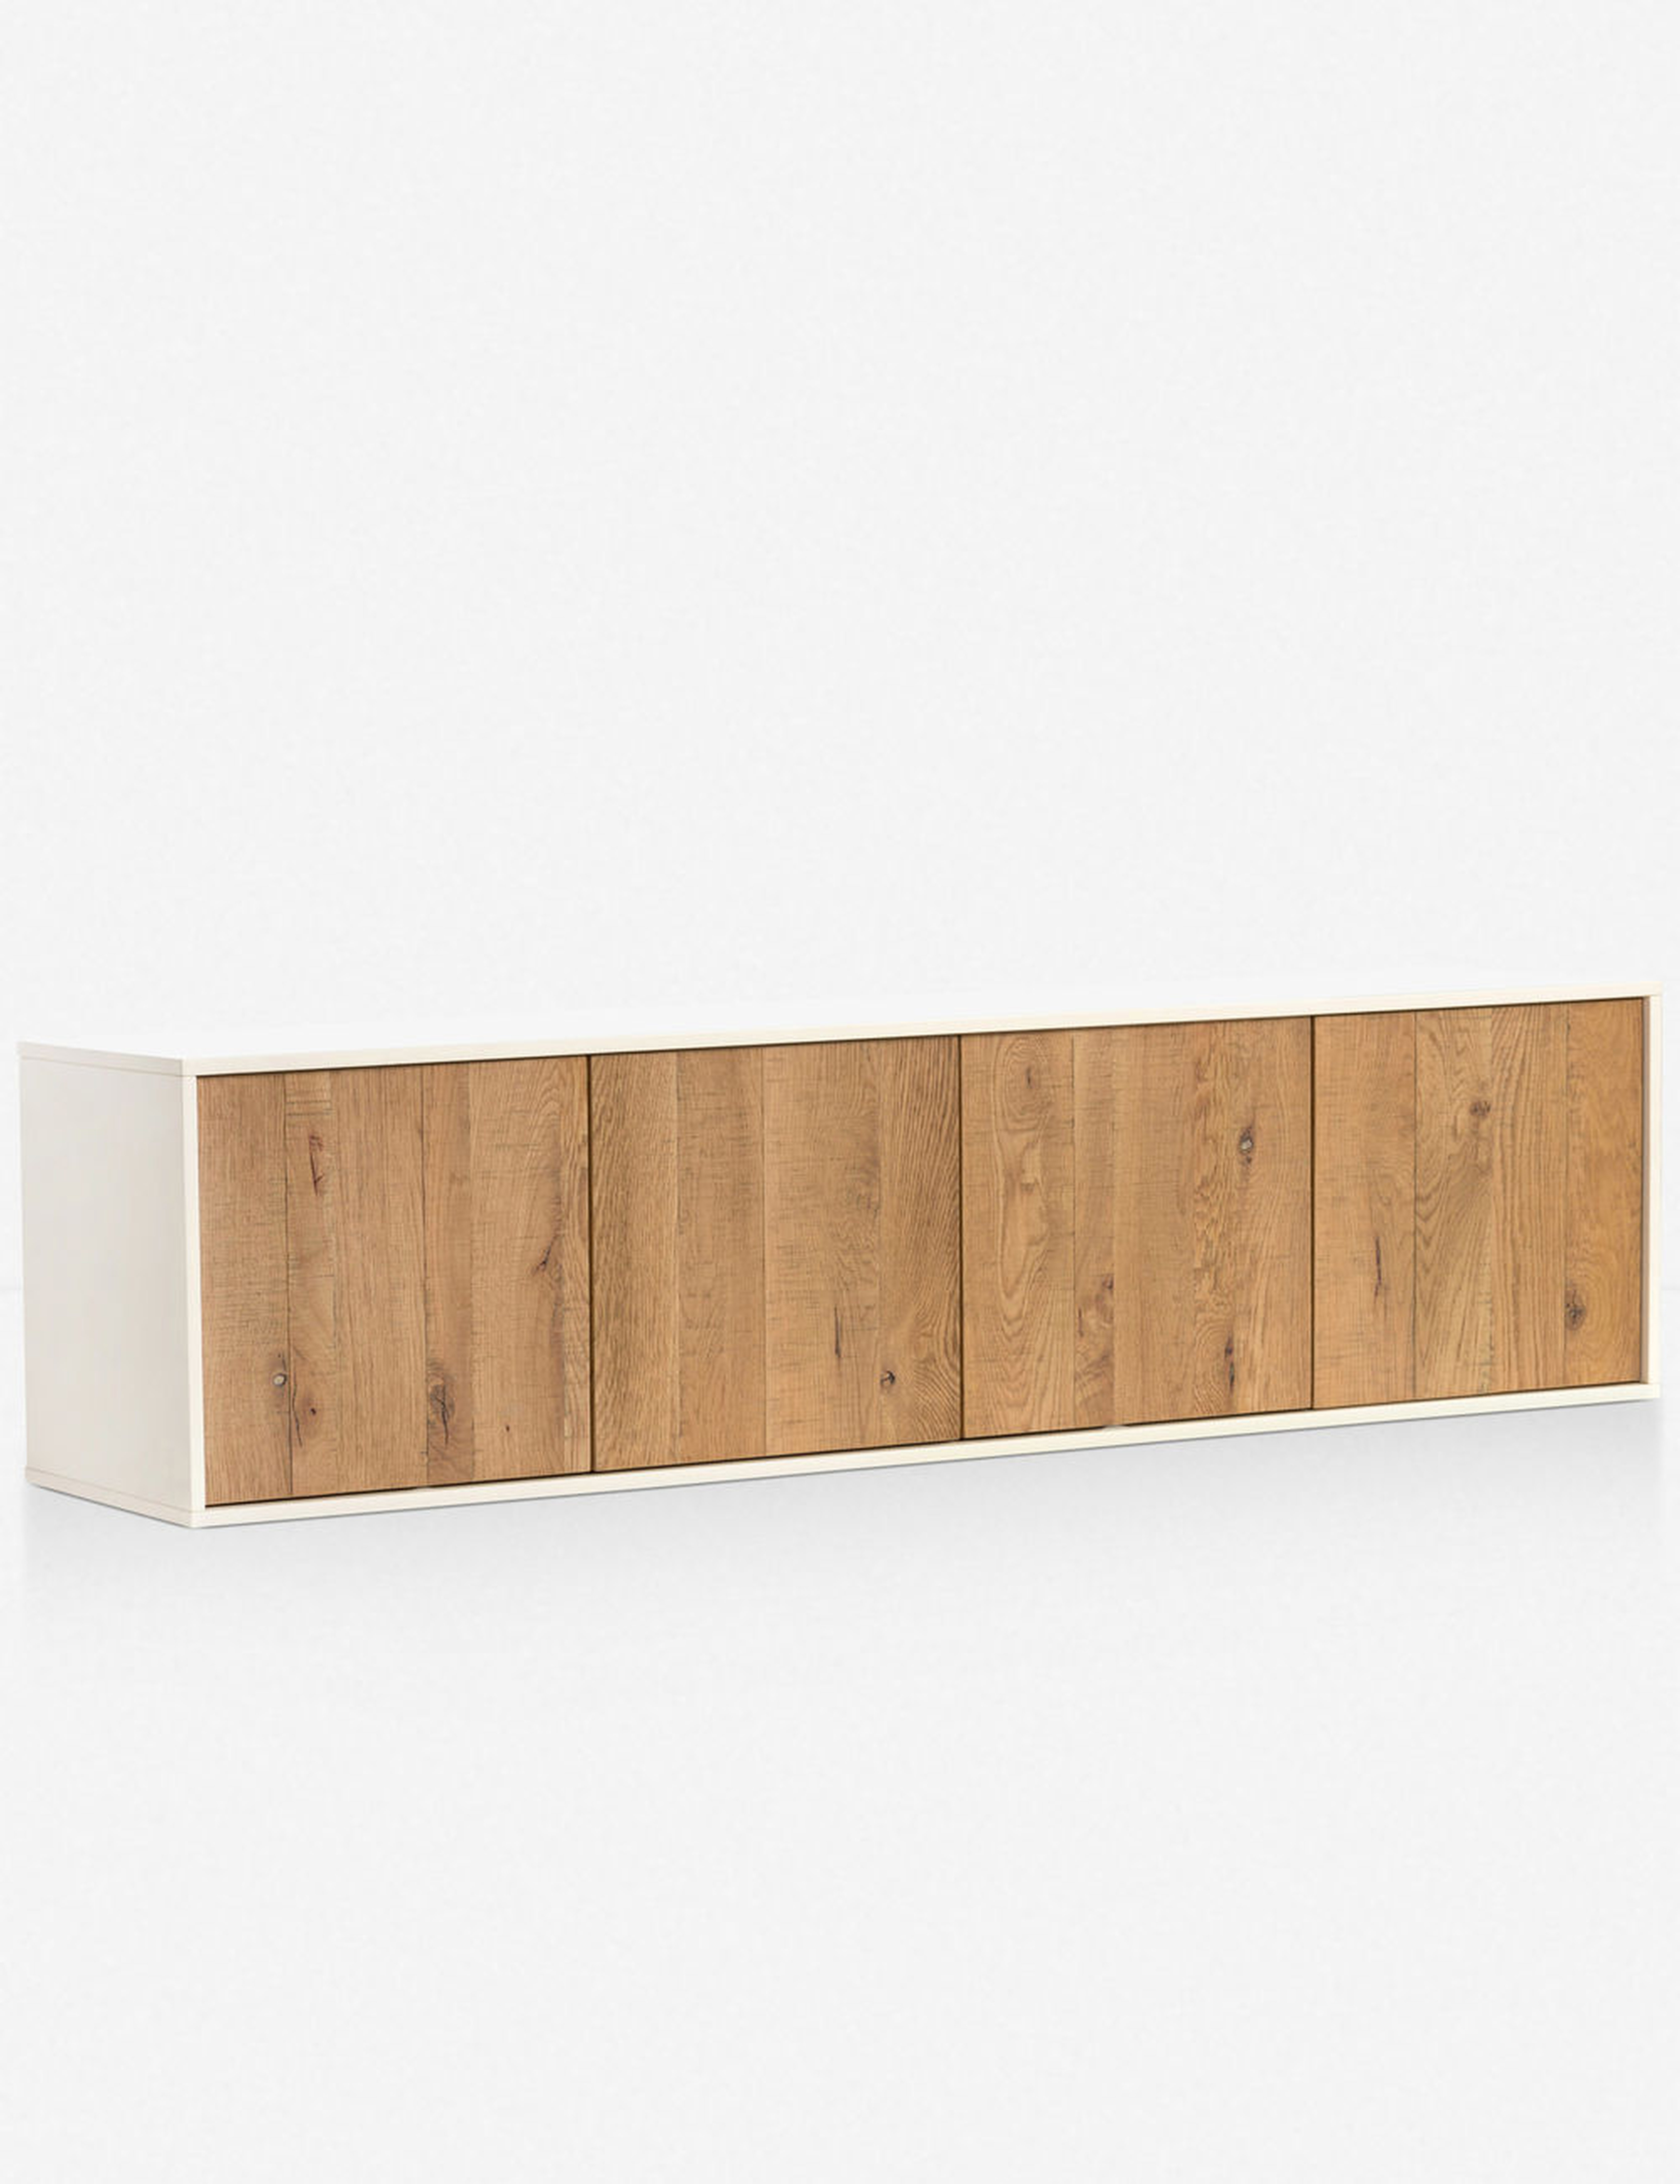 DELANCEY FLOATING MEDIA CONSOLE, NATURAL AND WHITE - Lulu and Georgia